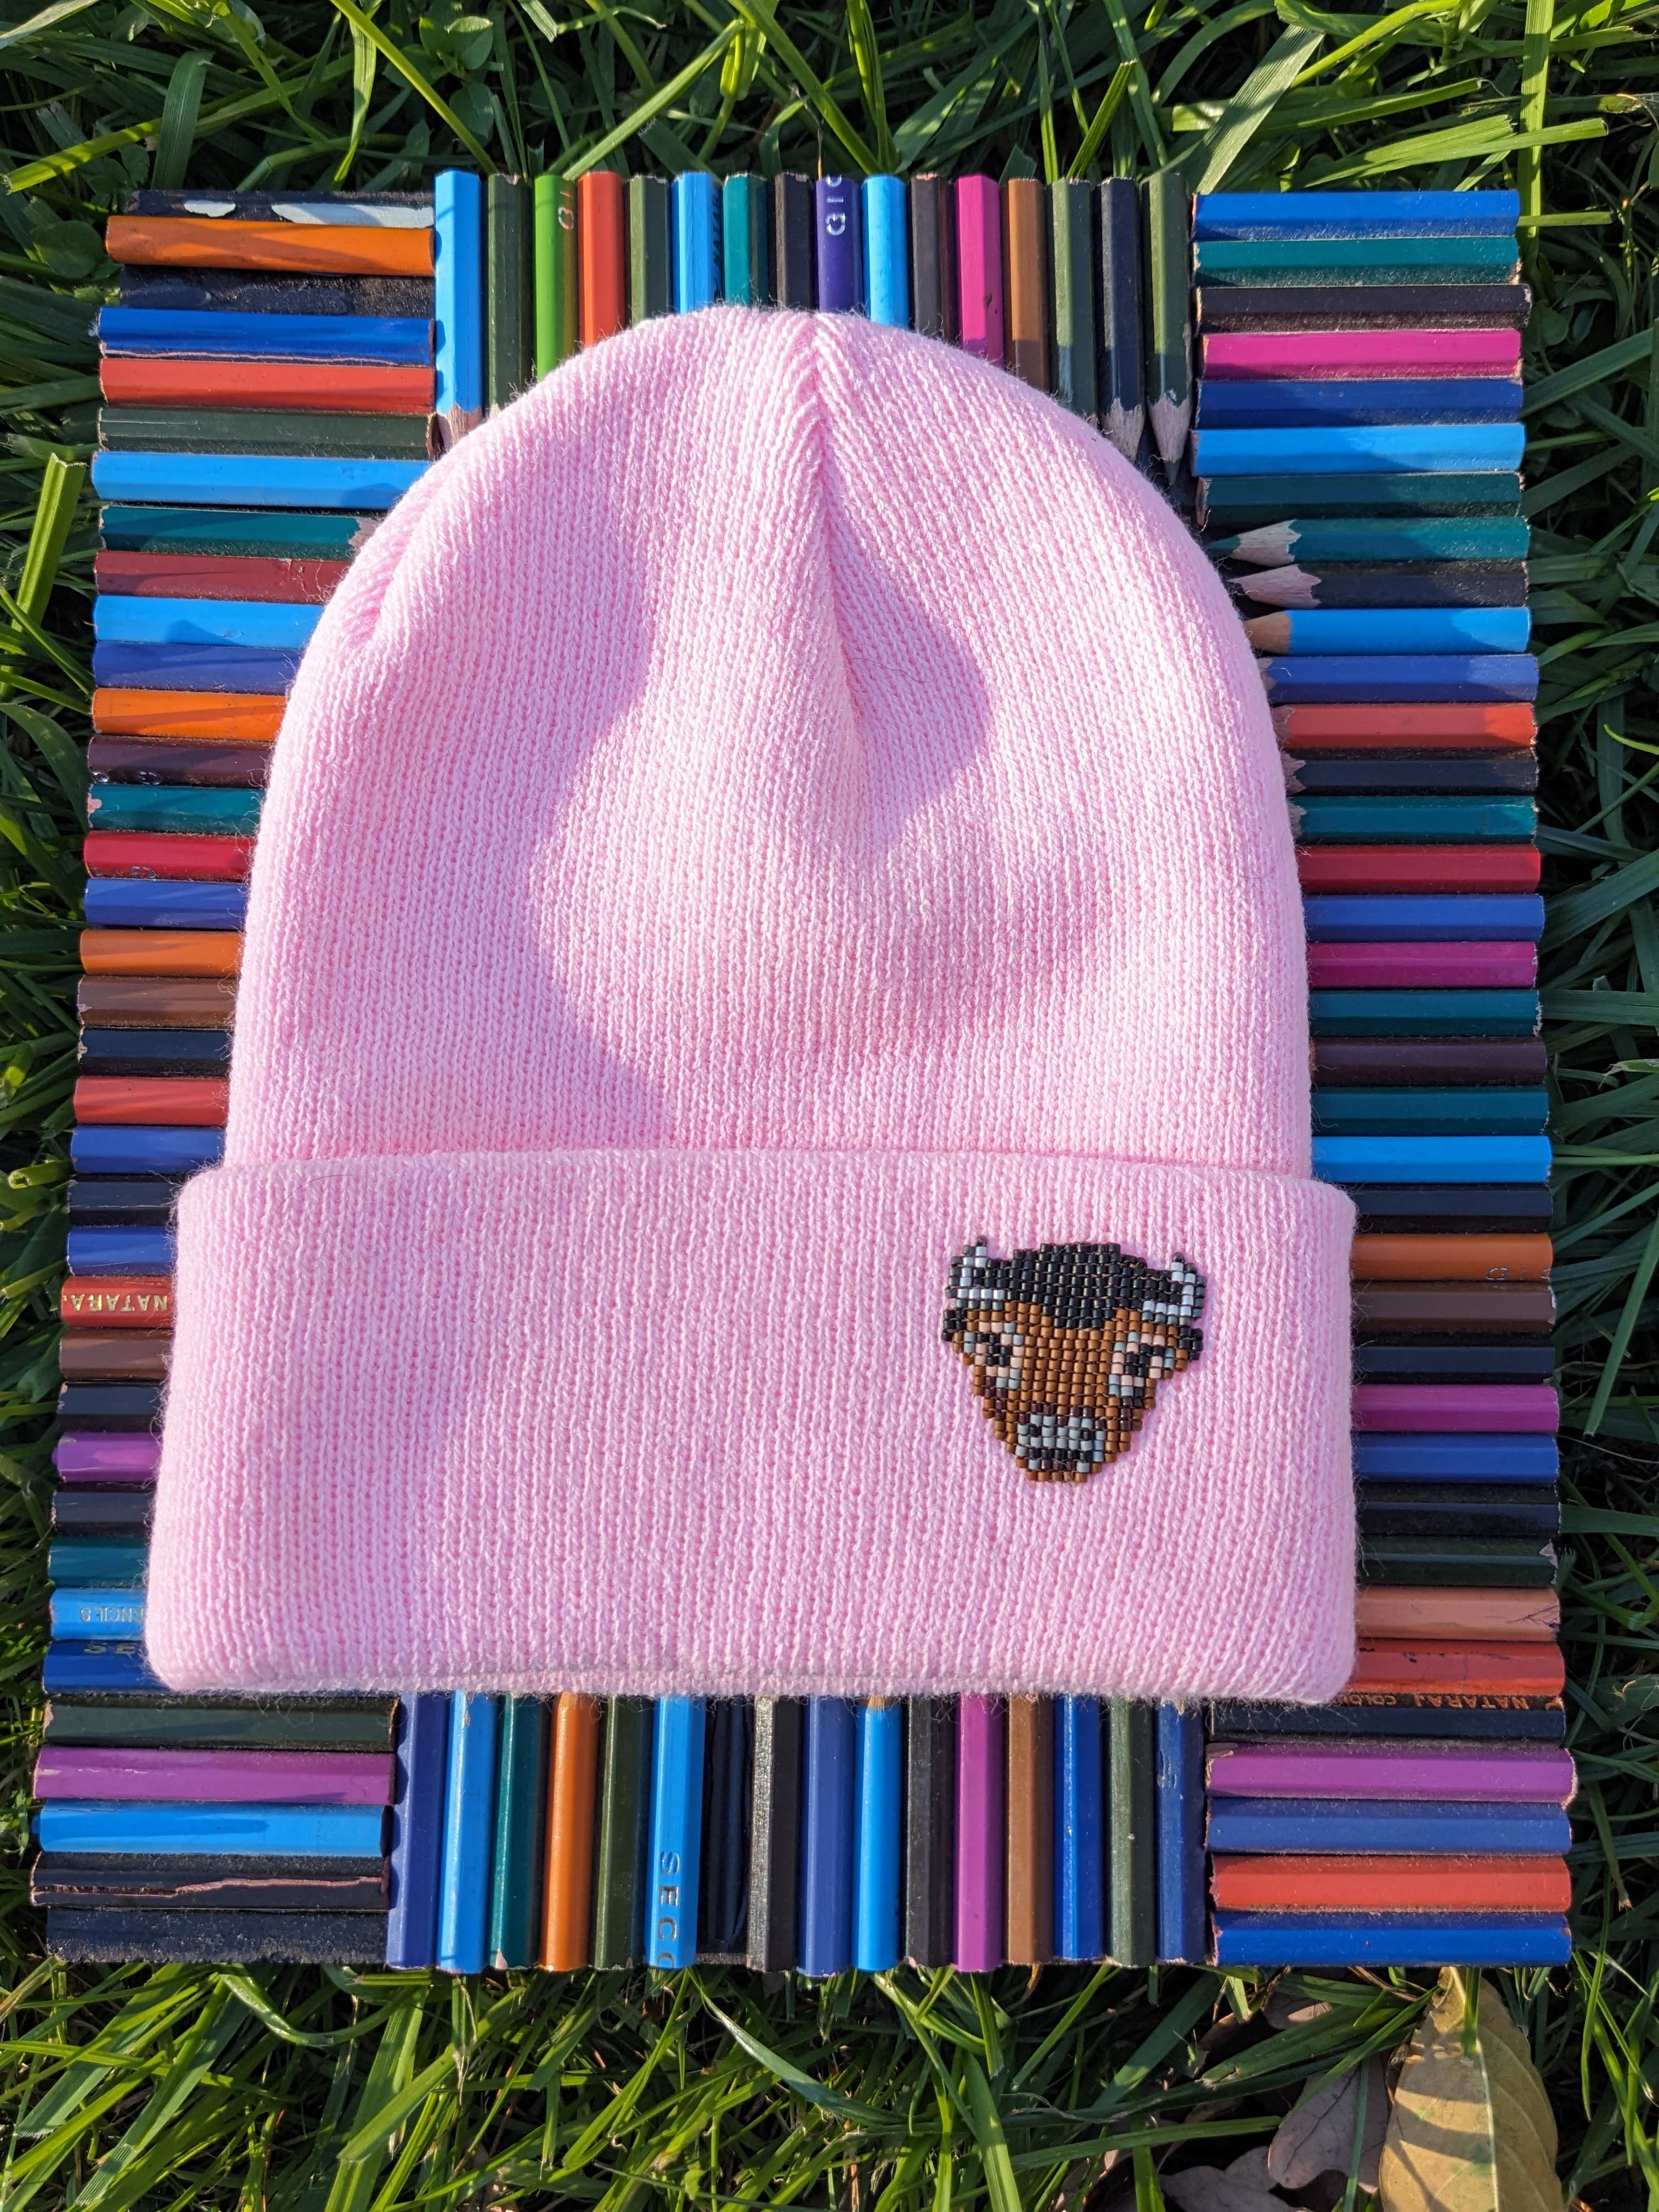 Children's Knit Hat with Beaded Bison